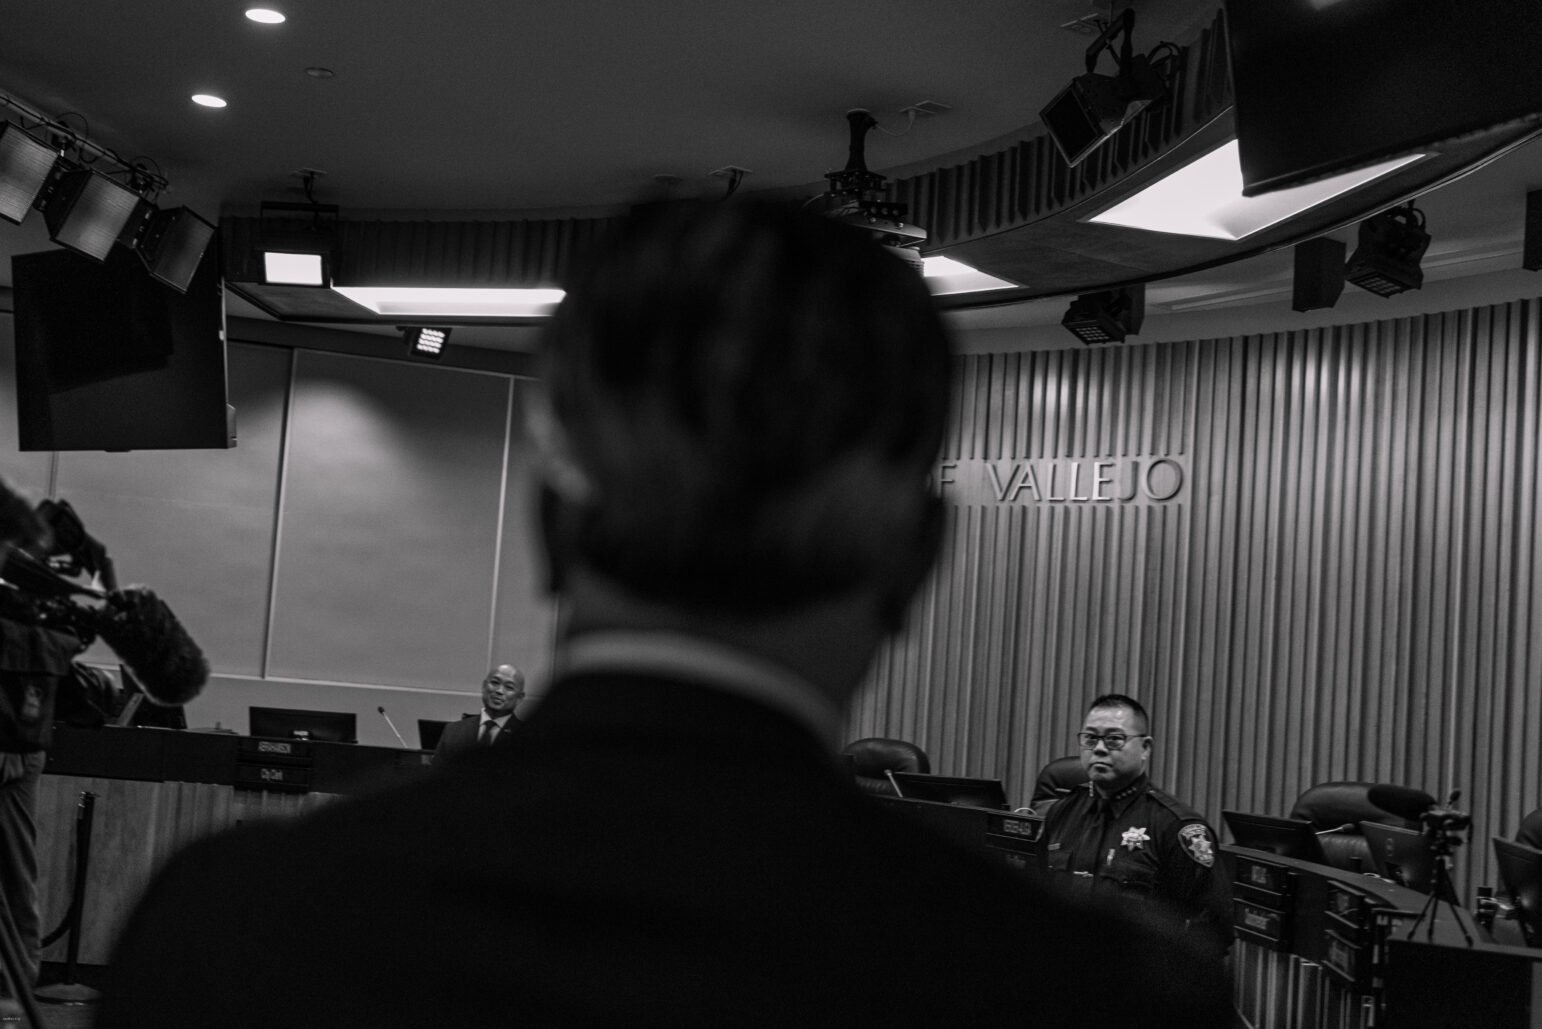 A black and white photo taken from behind a person's head, overlooking a city council chamber where a uniformed police officer is seated at the dais. The room is equipped with professional lighting and video recording equipment, indicating a formal proceeding or event. The words 'CITY OF VALLEJO' are prominently displayed on the wall behind the dais. The focus is on the officer and the surroundings, with the foreground figure's head slightly blurred.